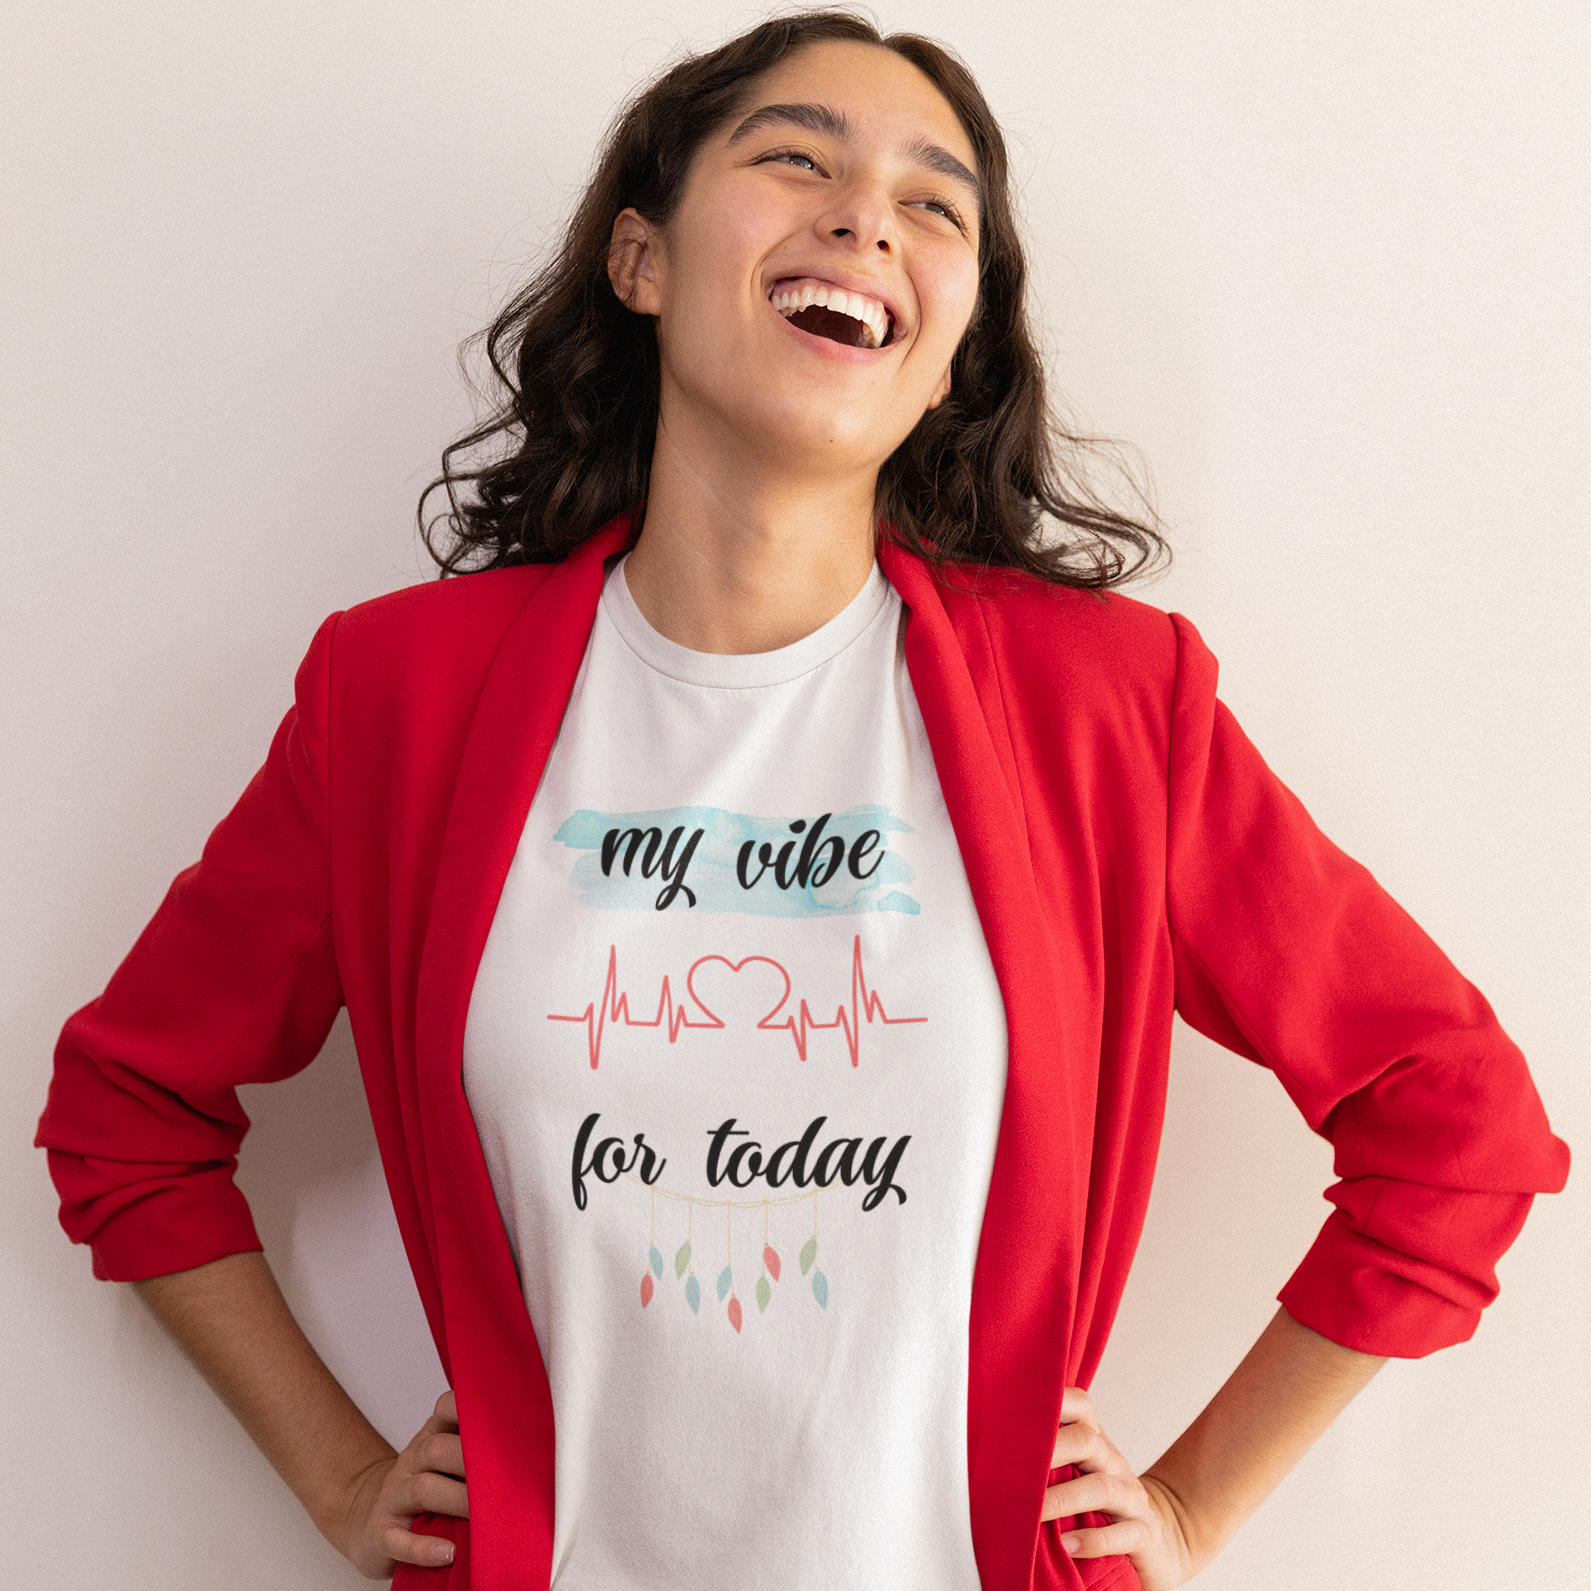 Story of Awakening Lifestyle Community Spirituality Relationships Love Light Meditation Oneness Earth Balance Healing Shop Store Charity Tree Nature Read Write T shirt Tops Tees Clothing Women Horoscope Organic Cotton Vibe For Today Is Love Quote